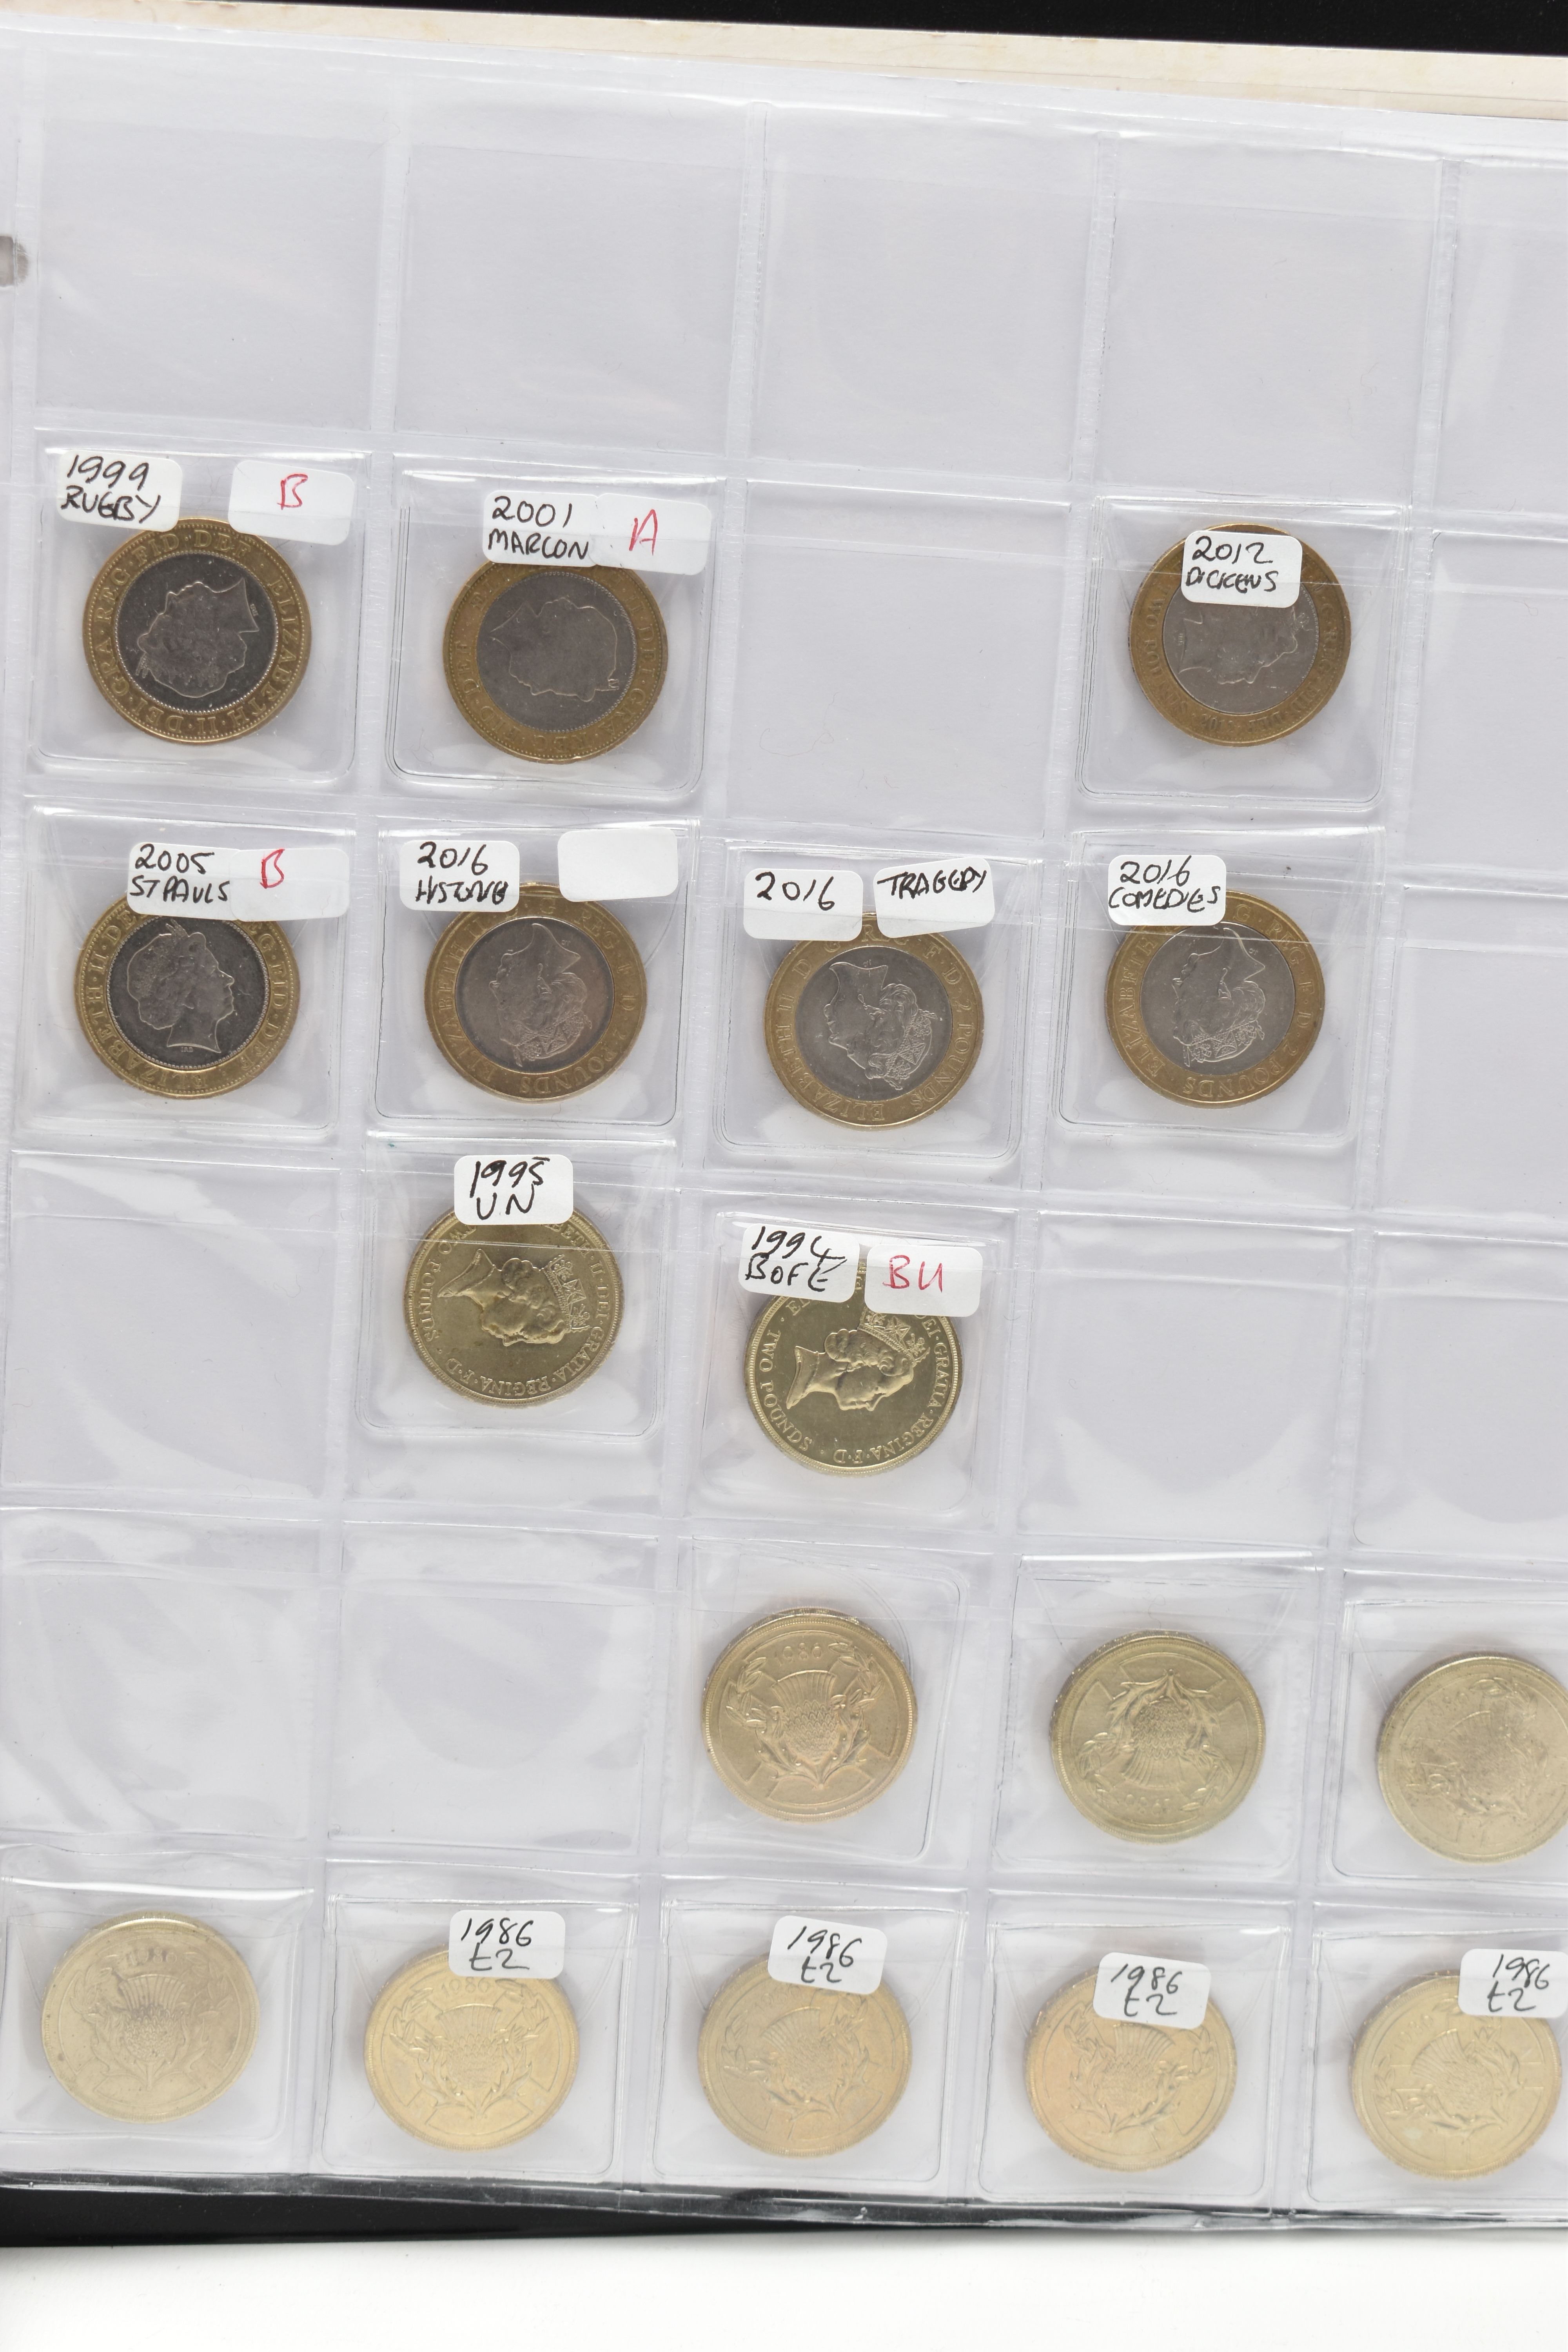 TWO COIN ALBUMS OF UK COINAGE FROM 1974-2018, to include Two Pound coins, Fifty Pence coins, with - Image 8 of 8